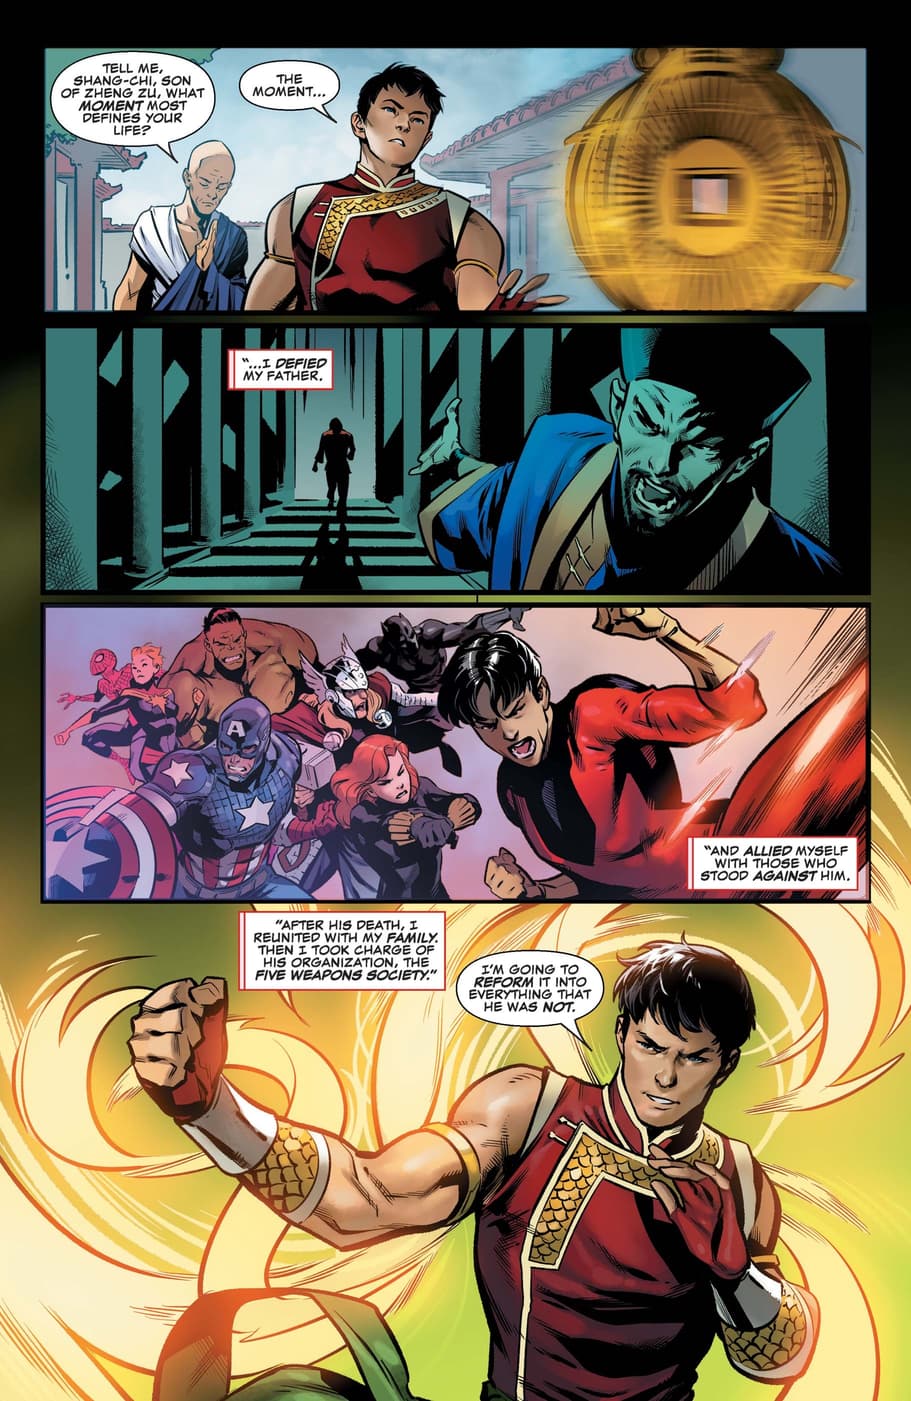 Shang-Chi's legacy in MARVEL'S VOICES: IDENTITY (2021) #1.